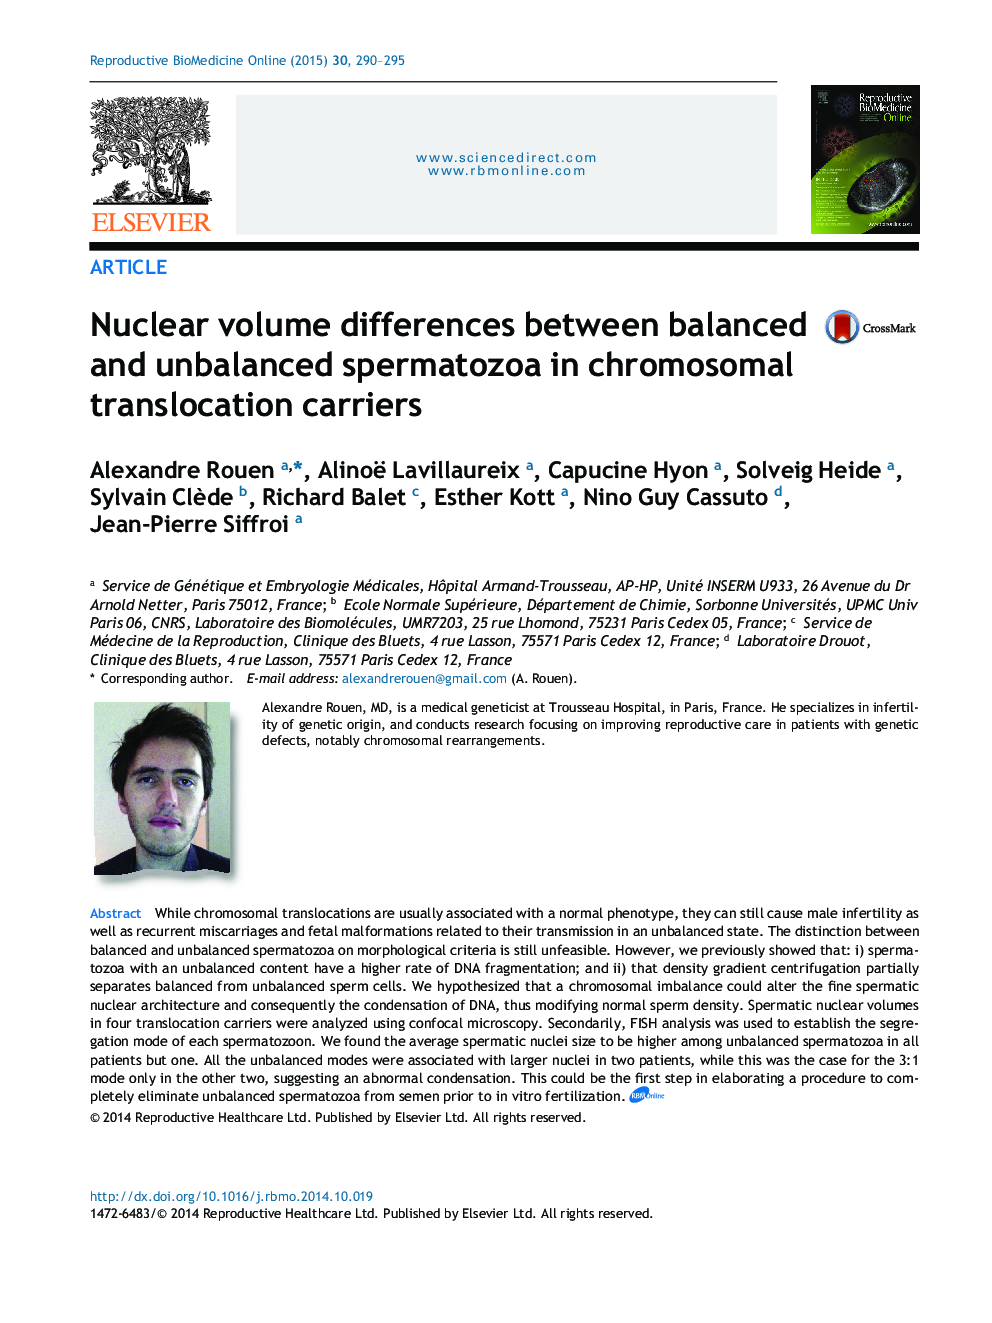 Nuclear volume differences between balanced and unbalanced spermatozoa in chromosomal translocation carriers